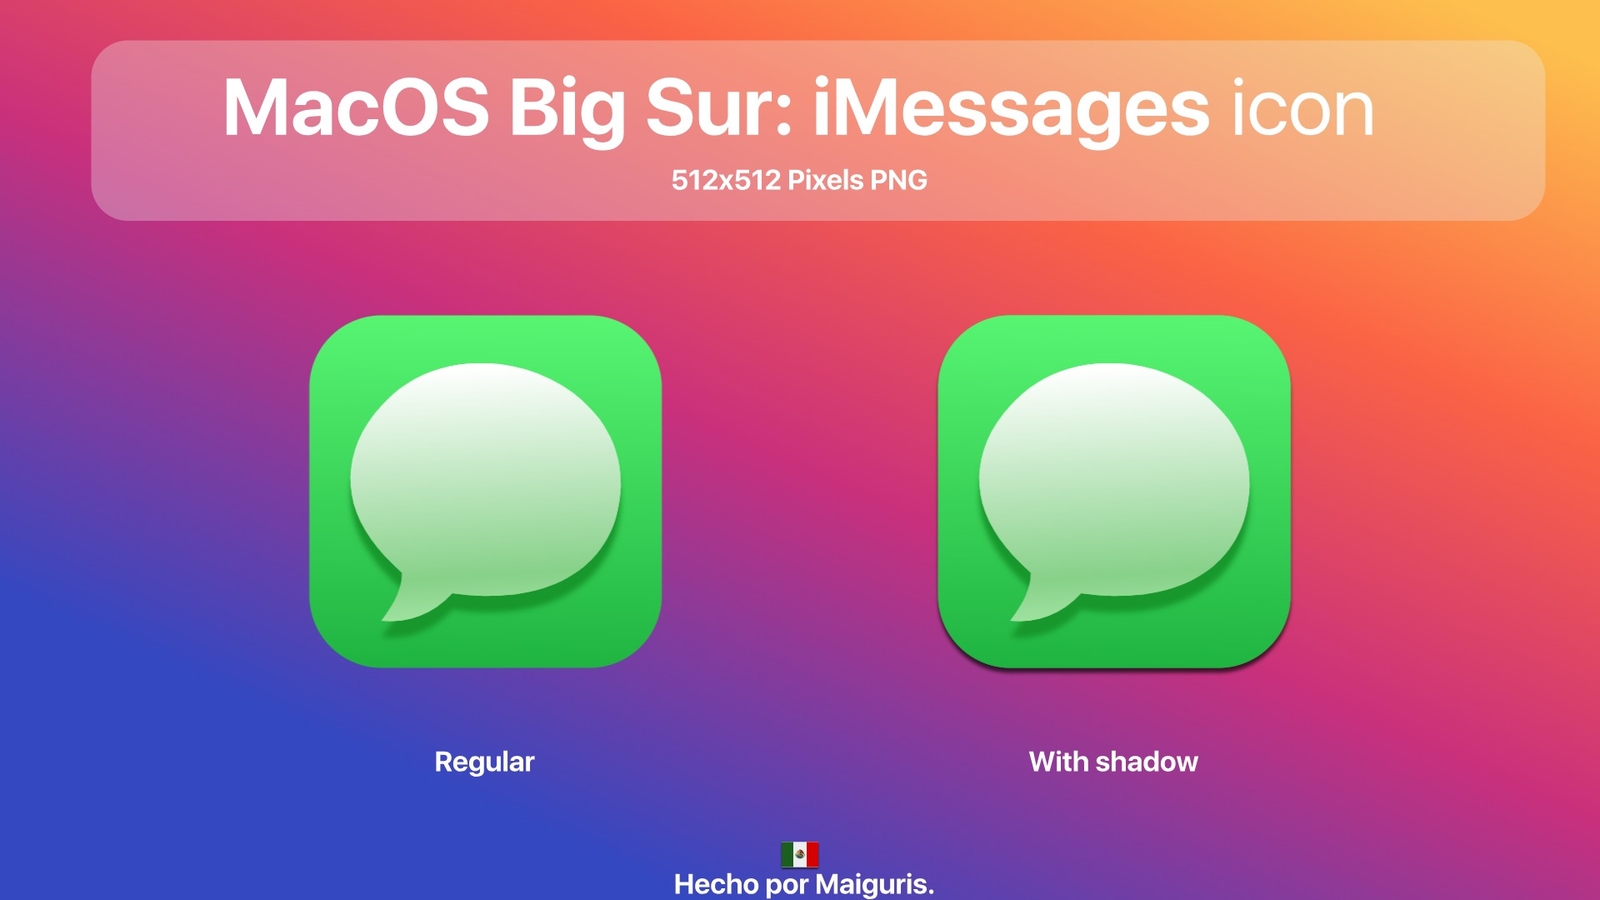 MacOS Big Sur New Messages Icon by Ivan R. on Dribbble